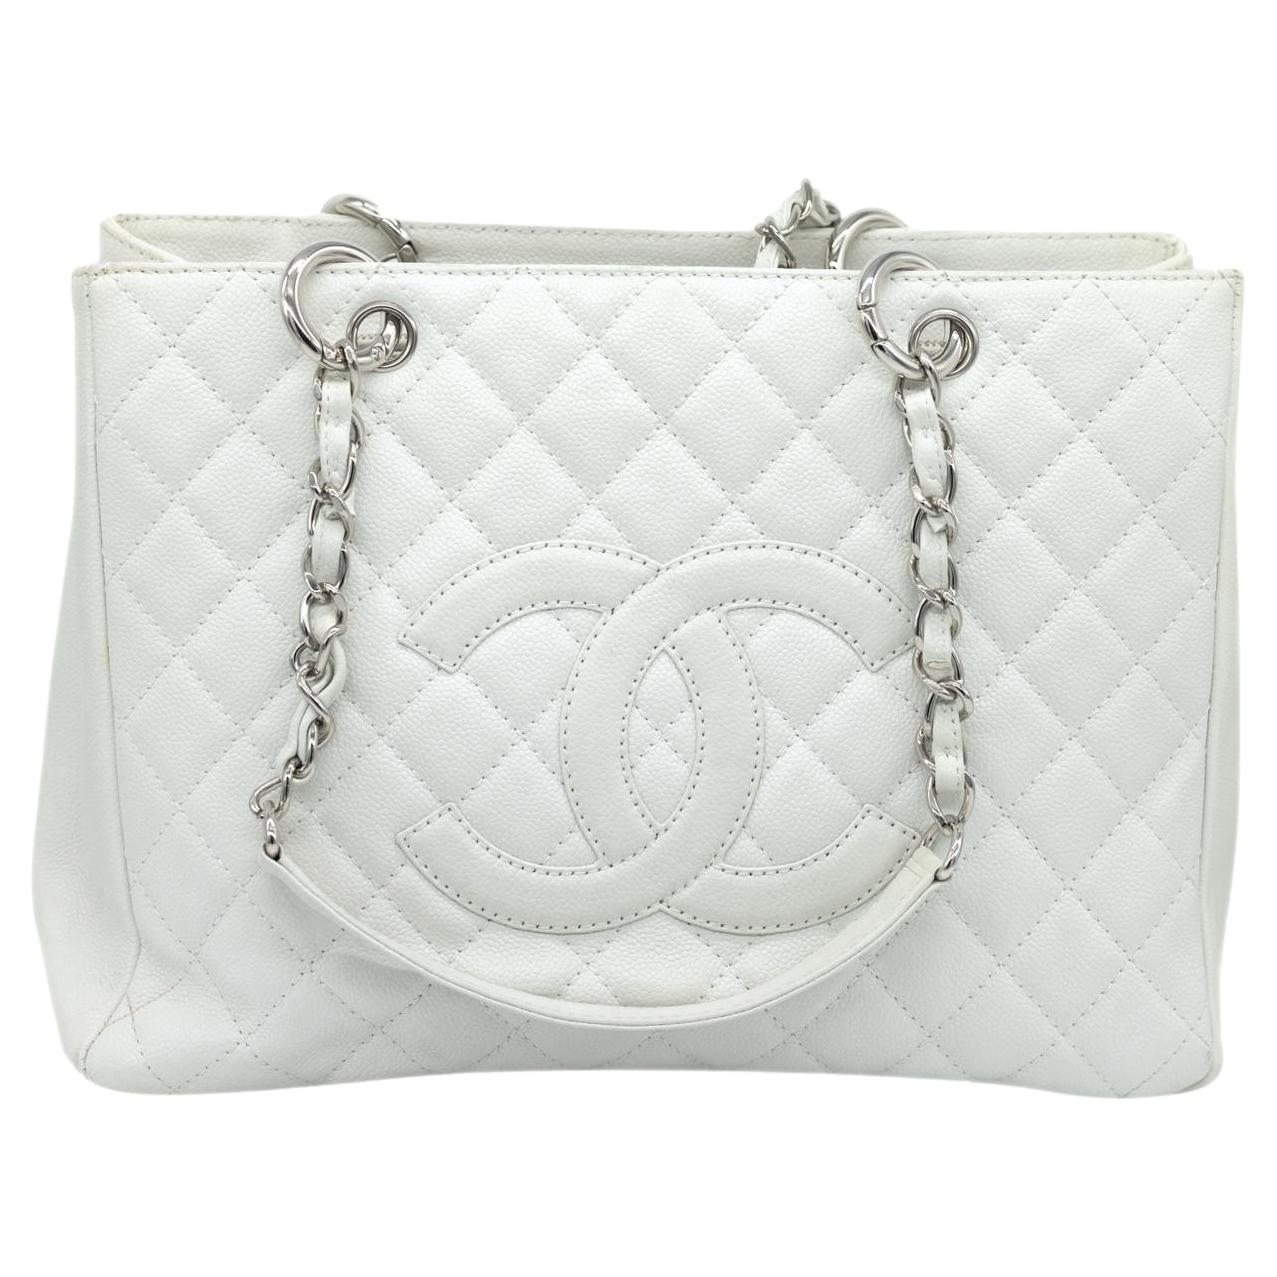 black and white chanel purse